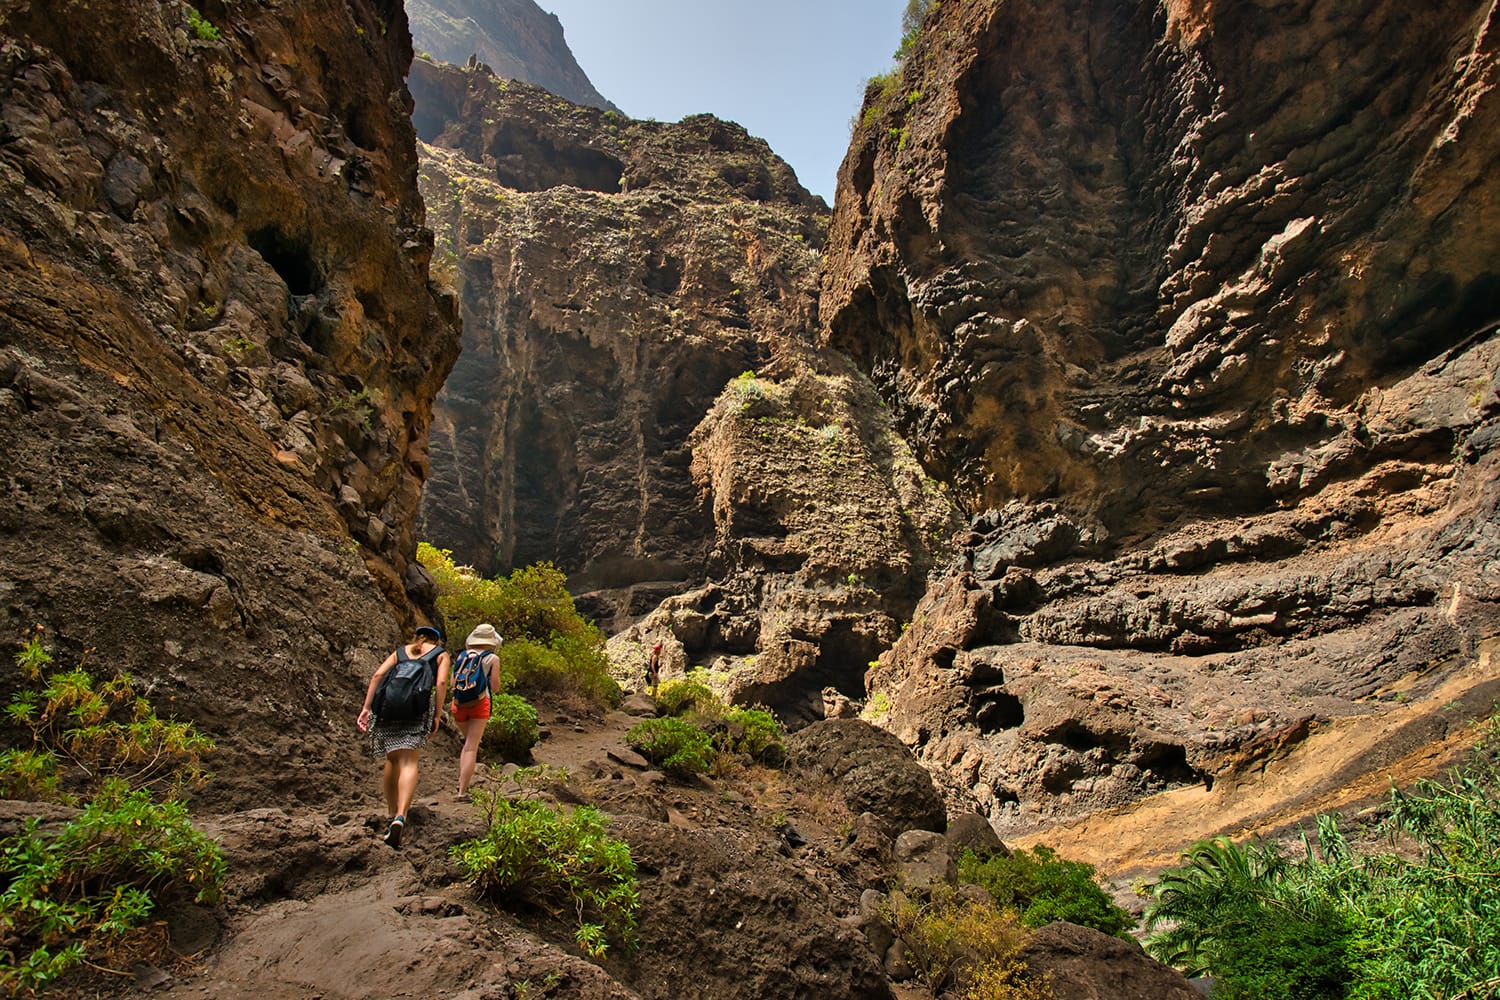 Hikers in Tenerife, Canary Islands